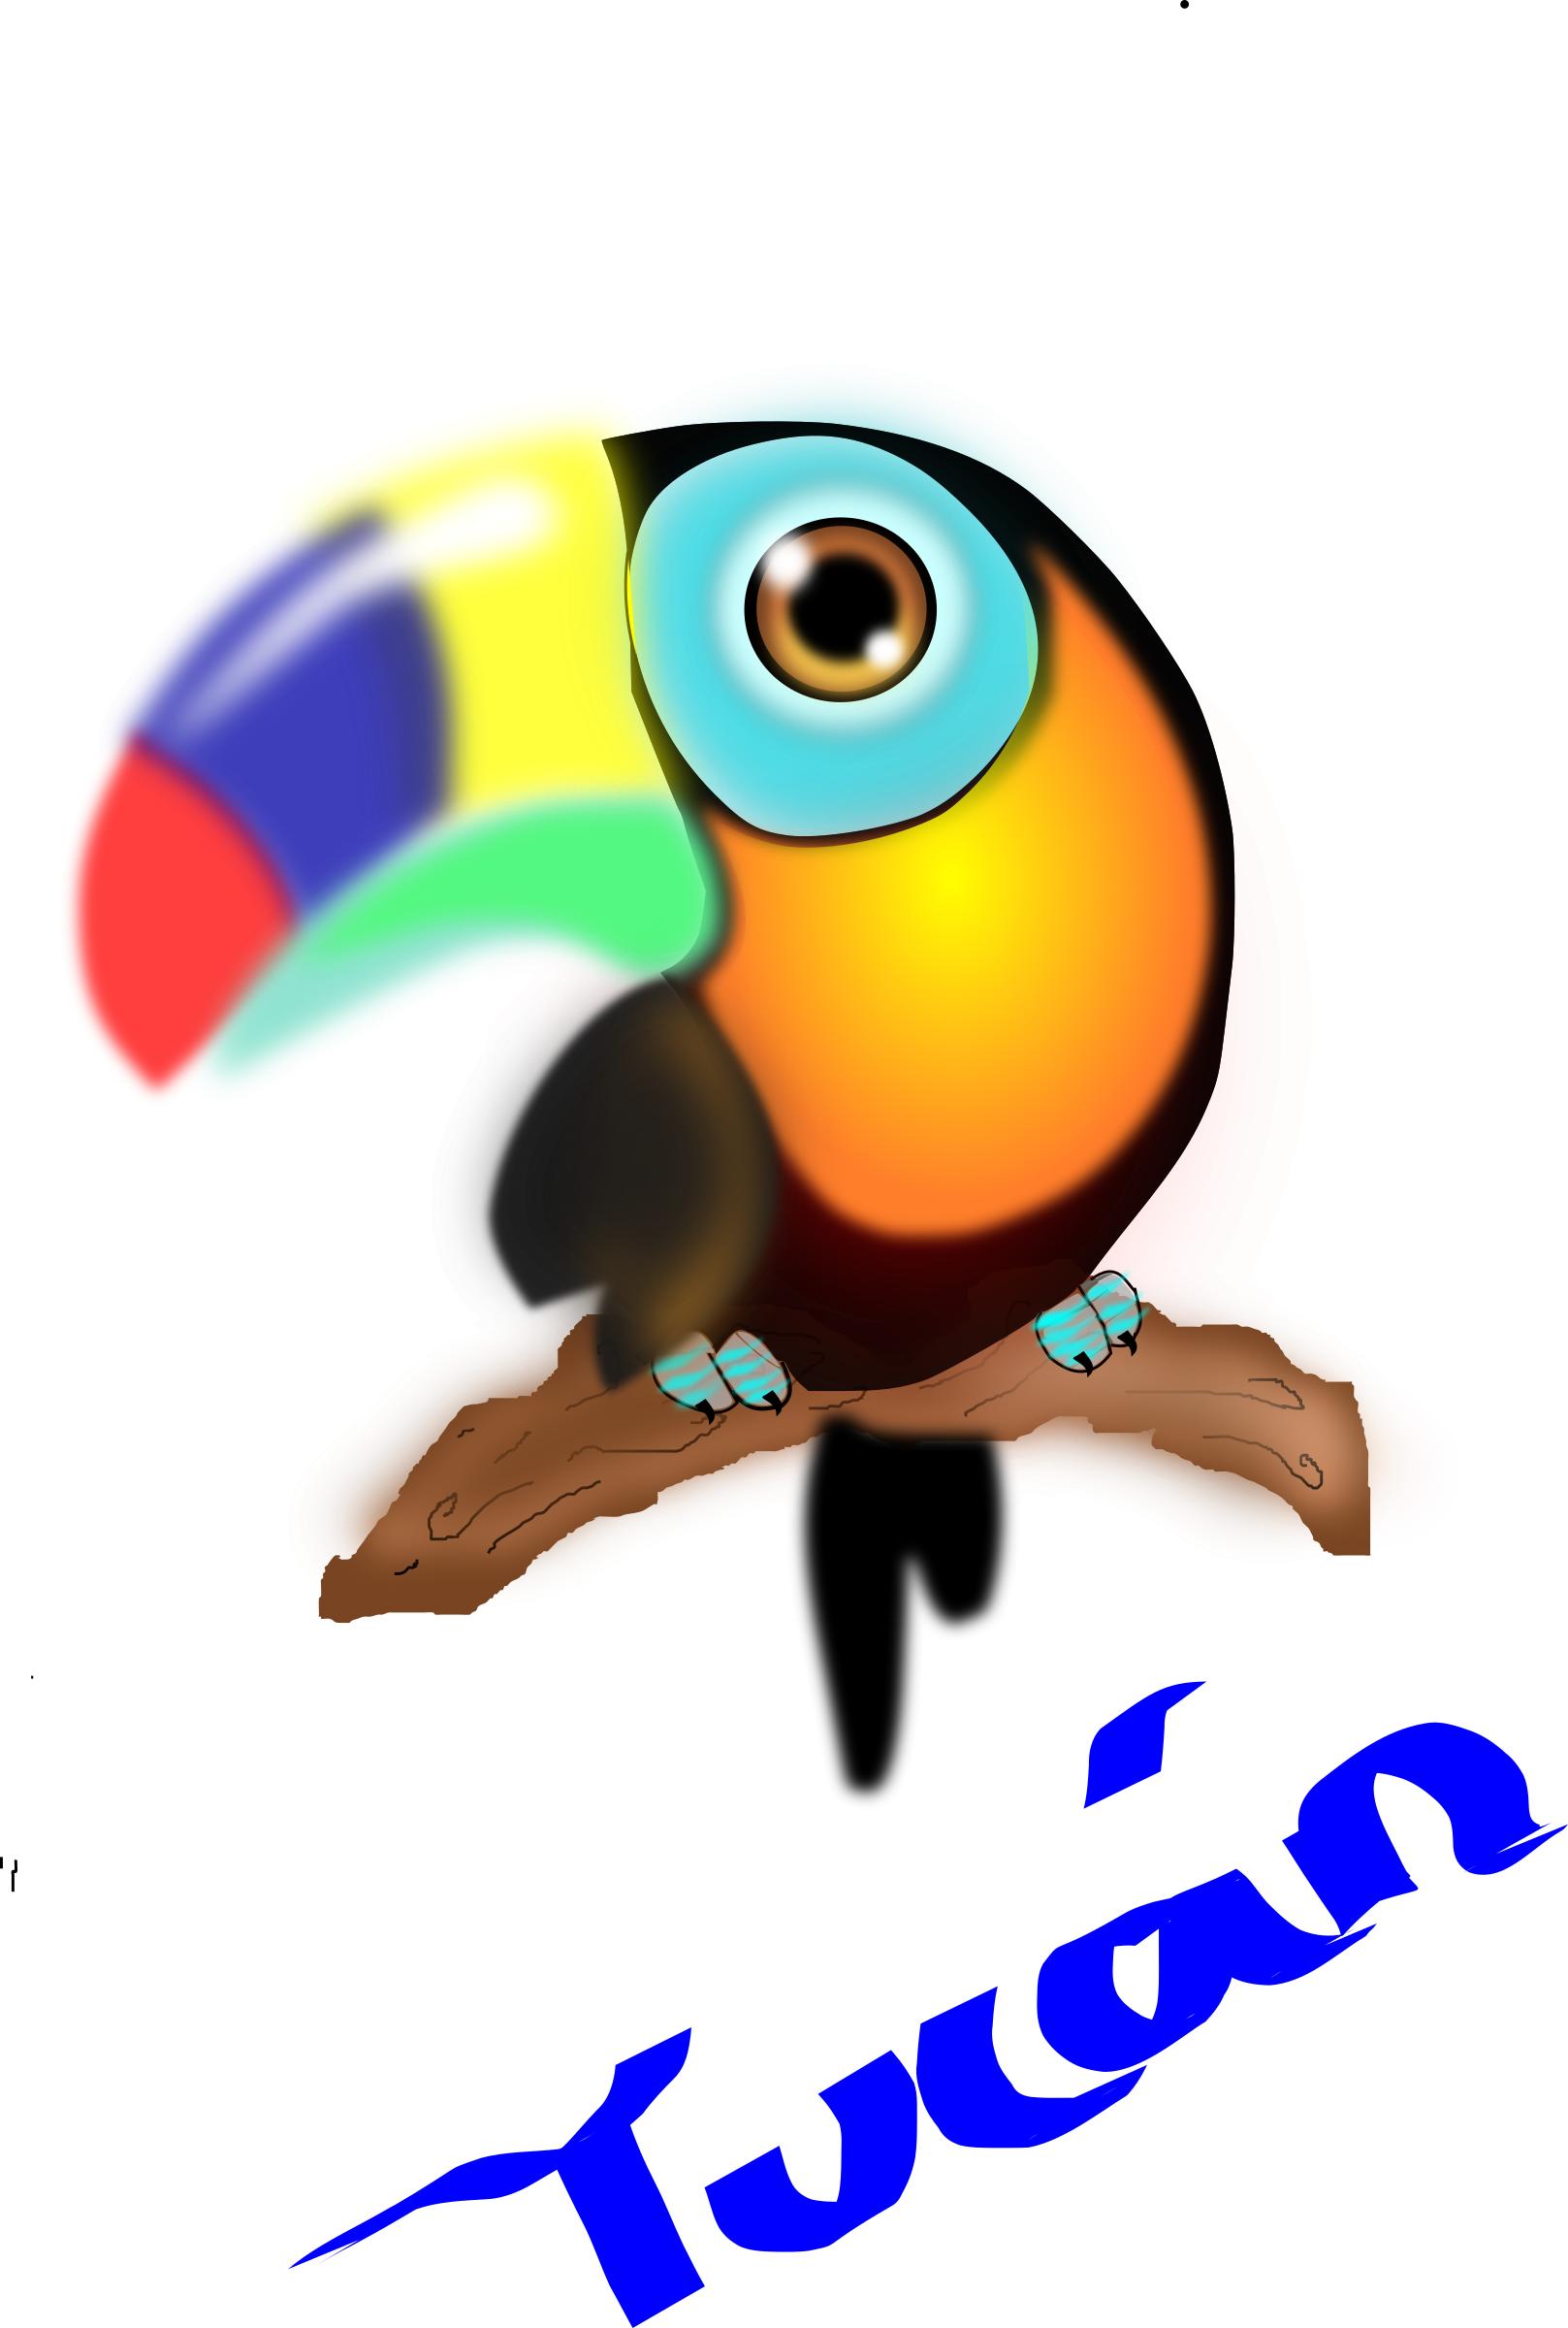 tucan colombiano png